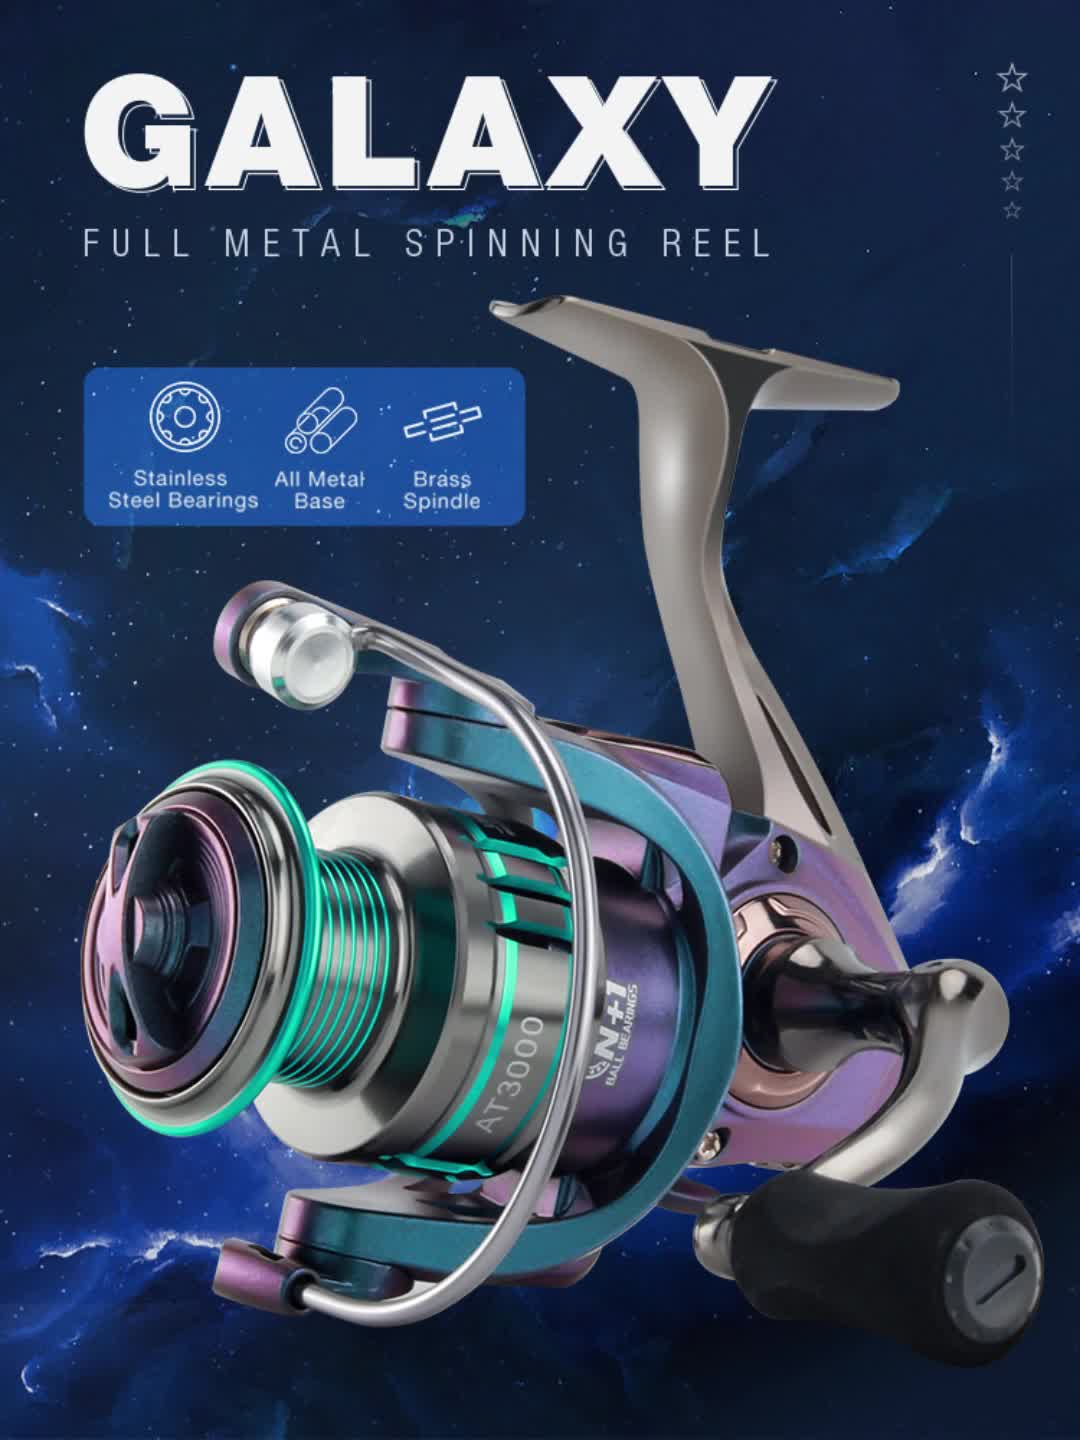 HAUT TON Spinning Reel 13000 15000 Series Advanced Version Review, Nice  heavy duty reel 